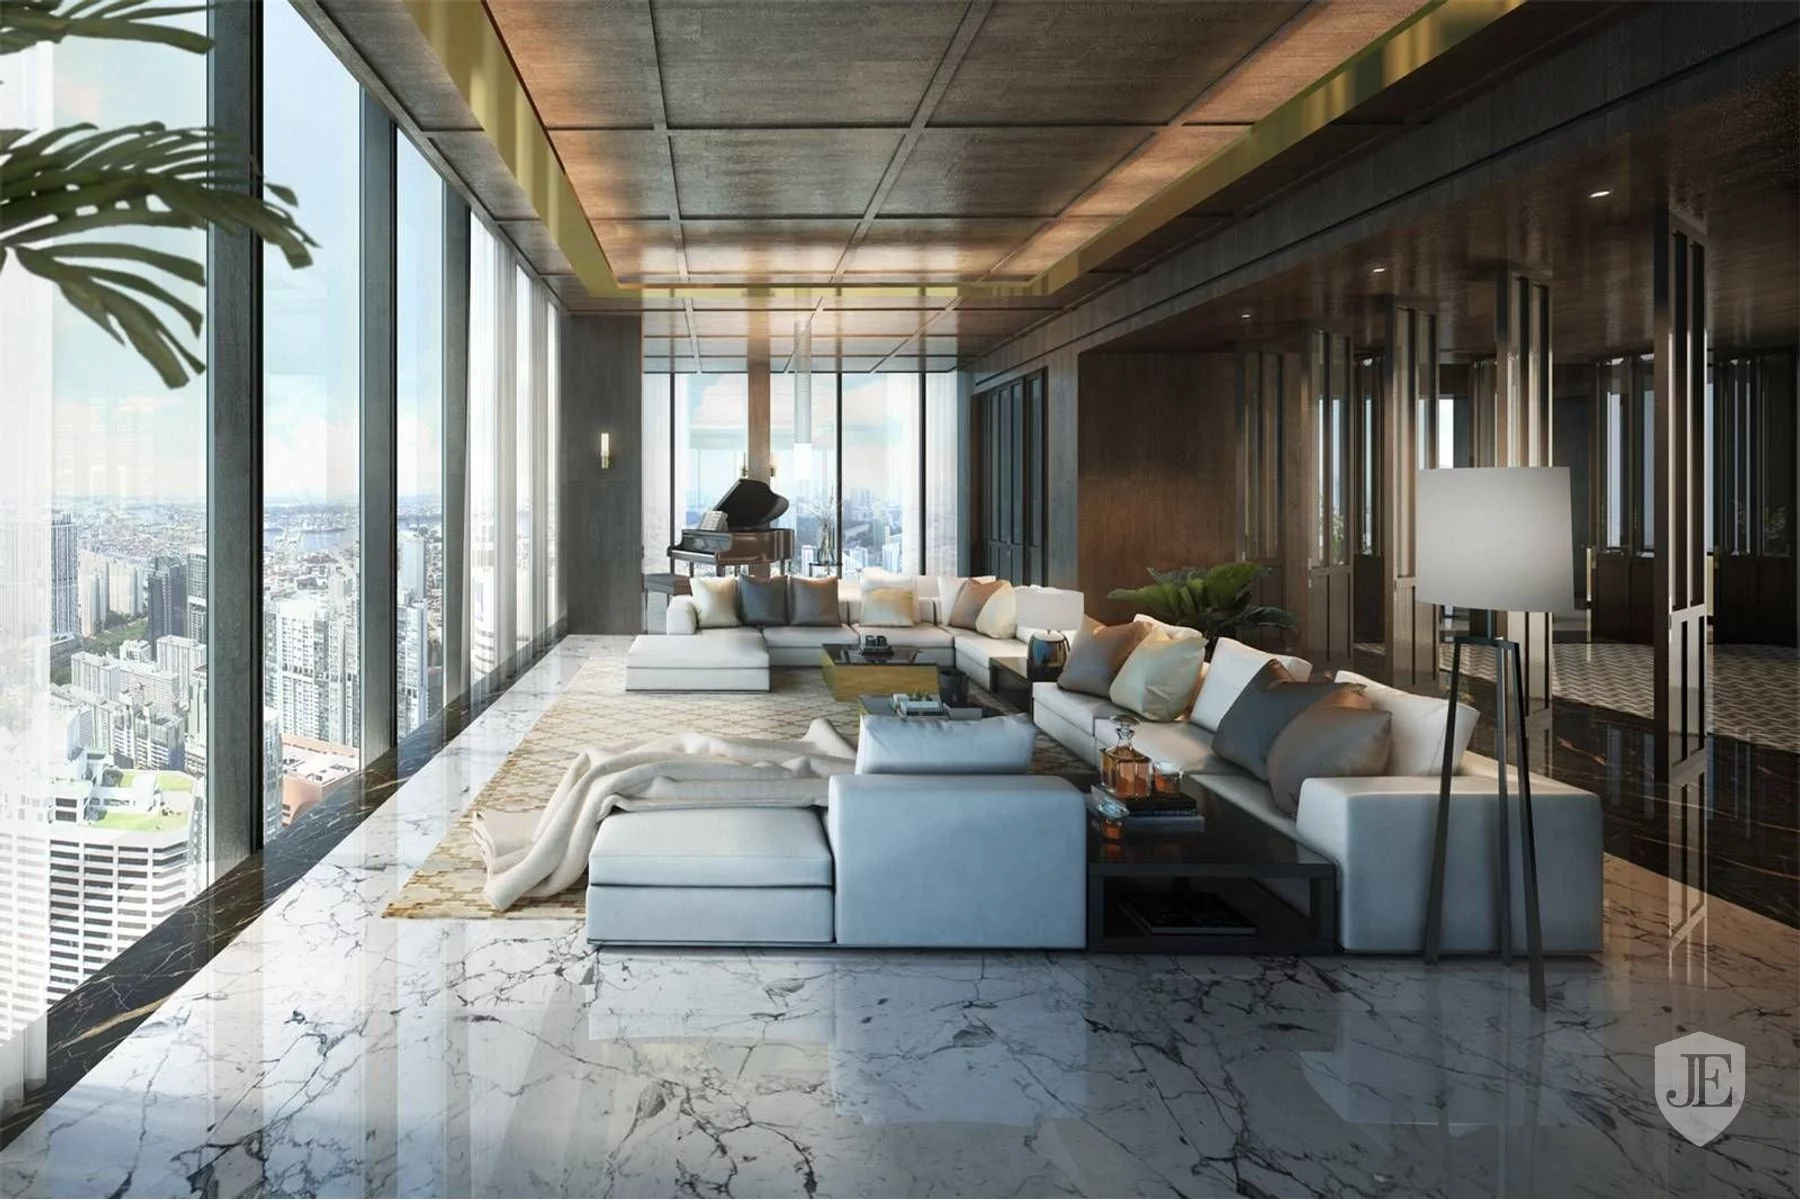 Sir James Dyson Has Just Bought Singapore’s Biggest Penthouse